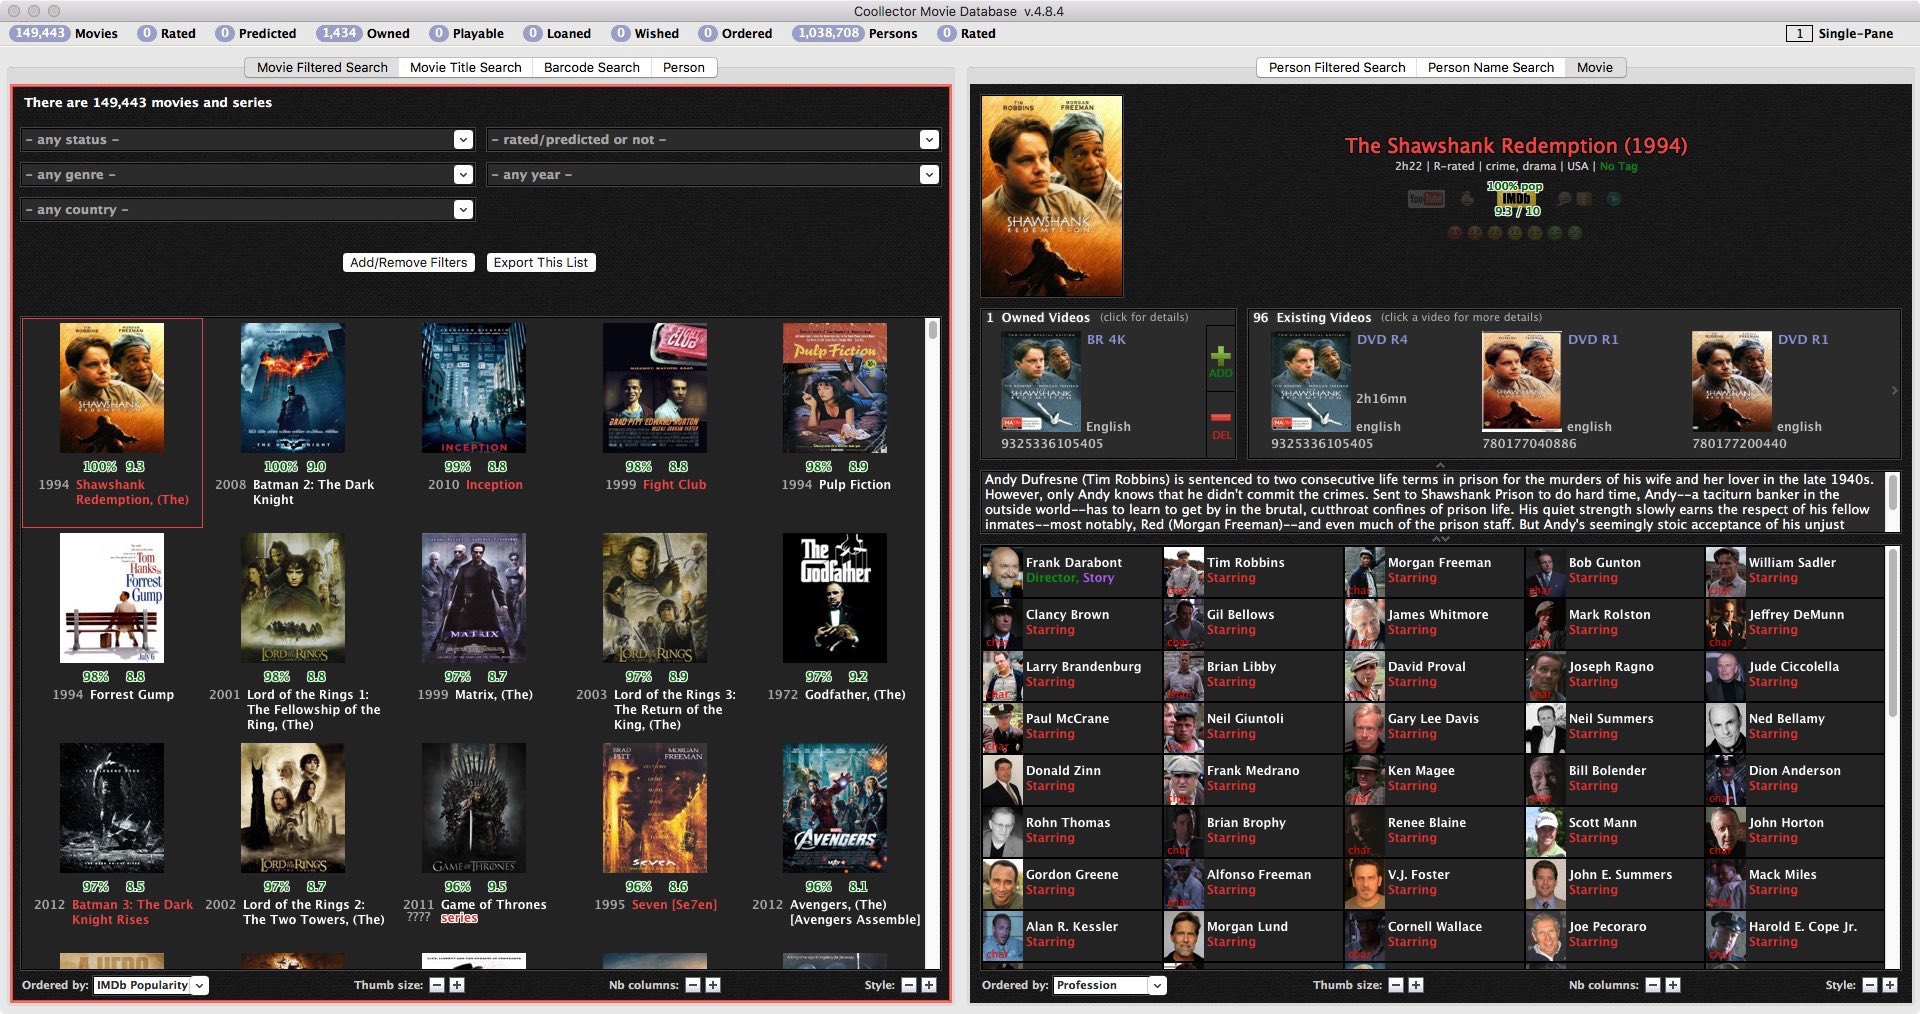 Download Coollector Movie Database 4.19.2 (Mac) Free